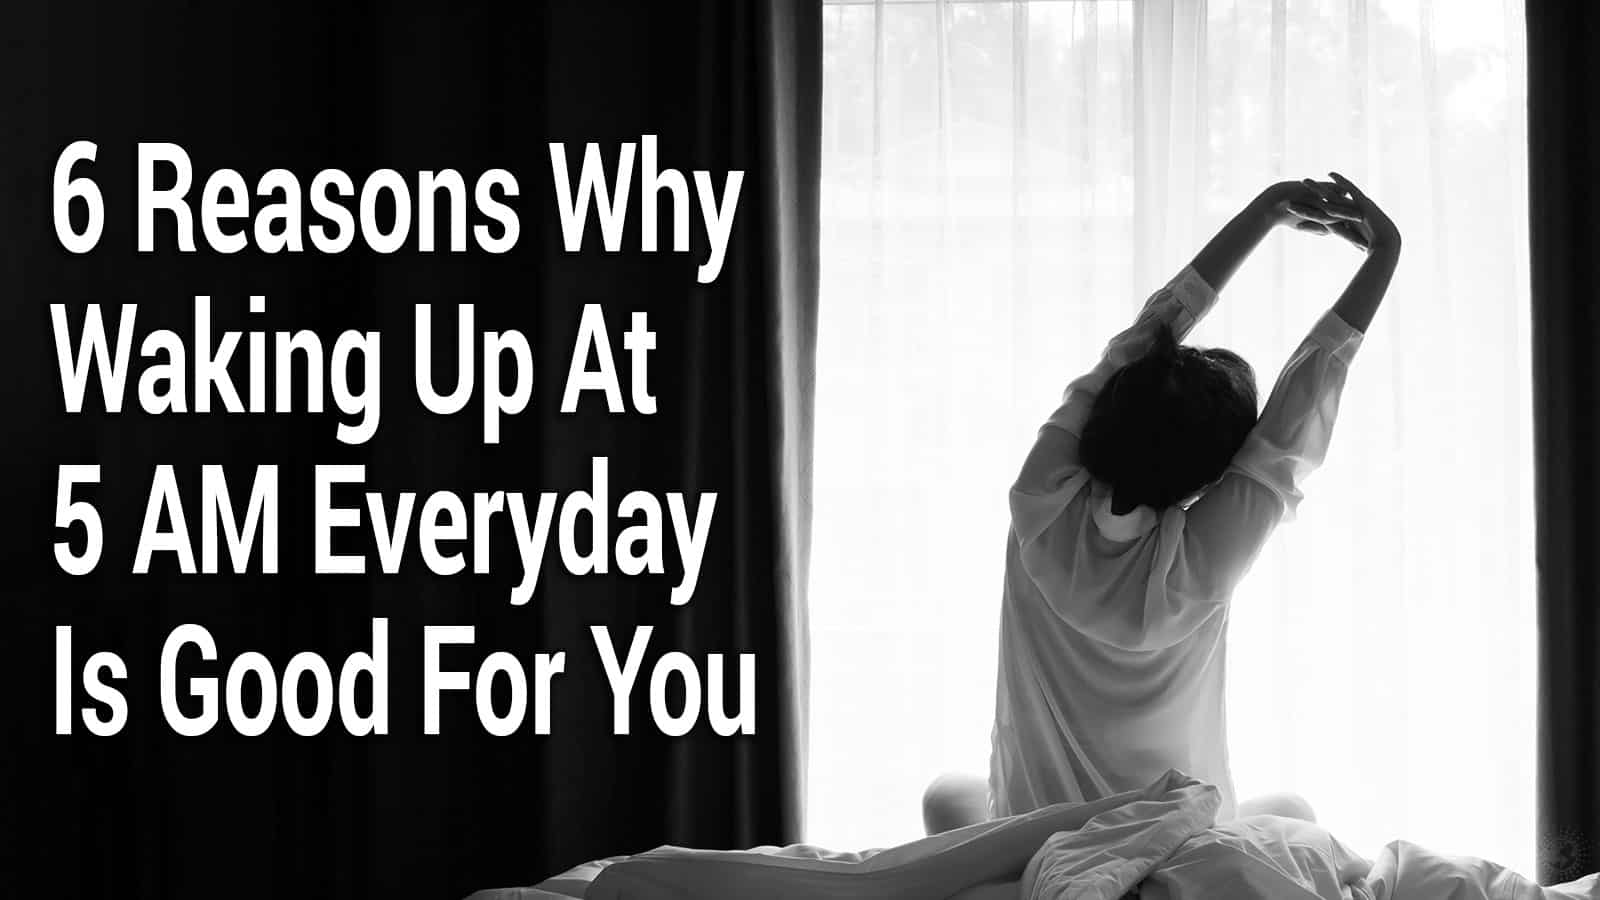 6-Reasons-Why-Waking-Up-At-5-AM-Everyday-Is-Good-For-You.jpg